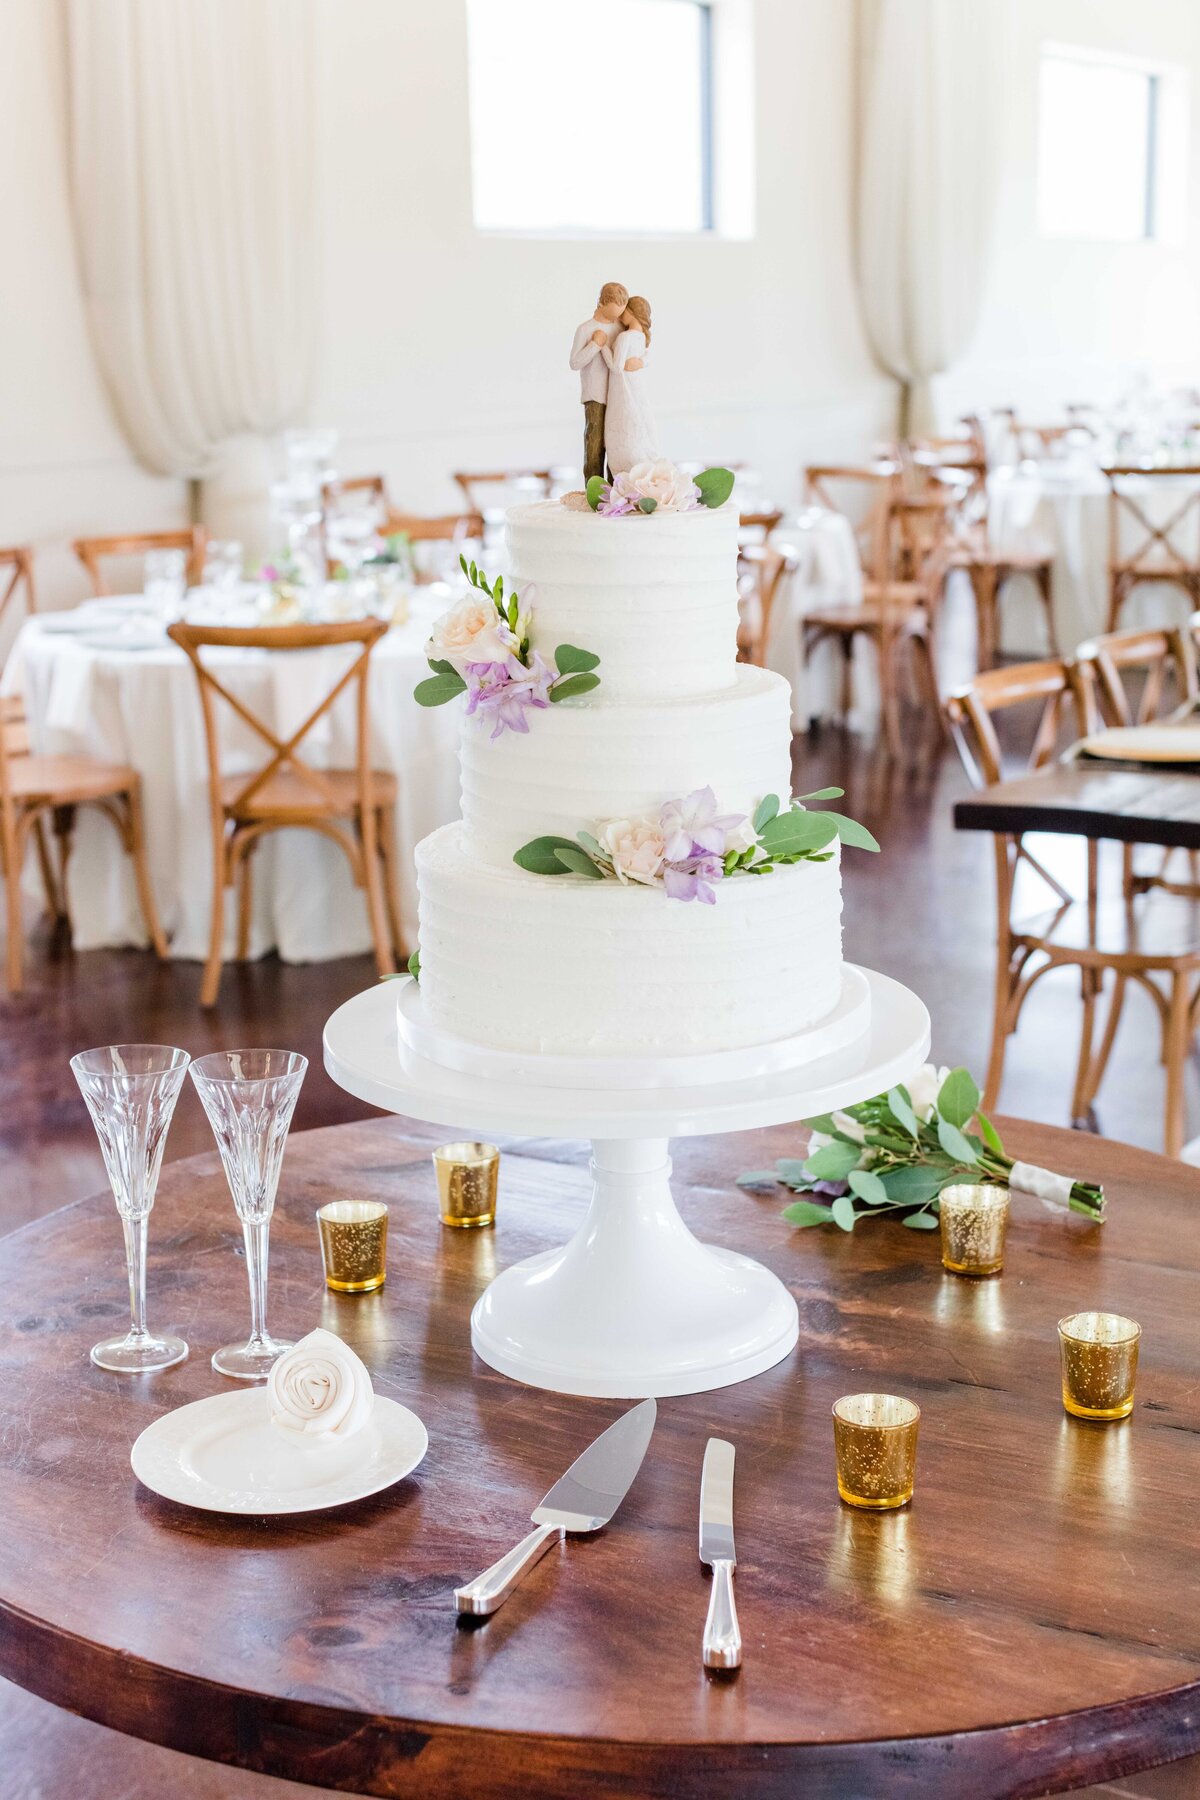 3 tier wedding cake with lavender flowers and crystal champagne flutes by Firefly Photography